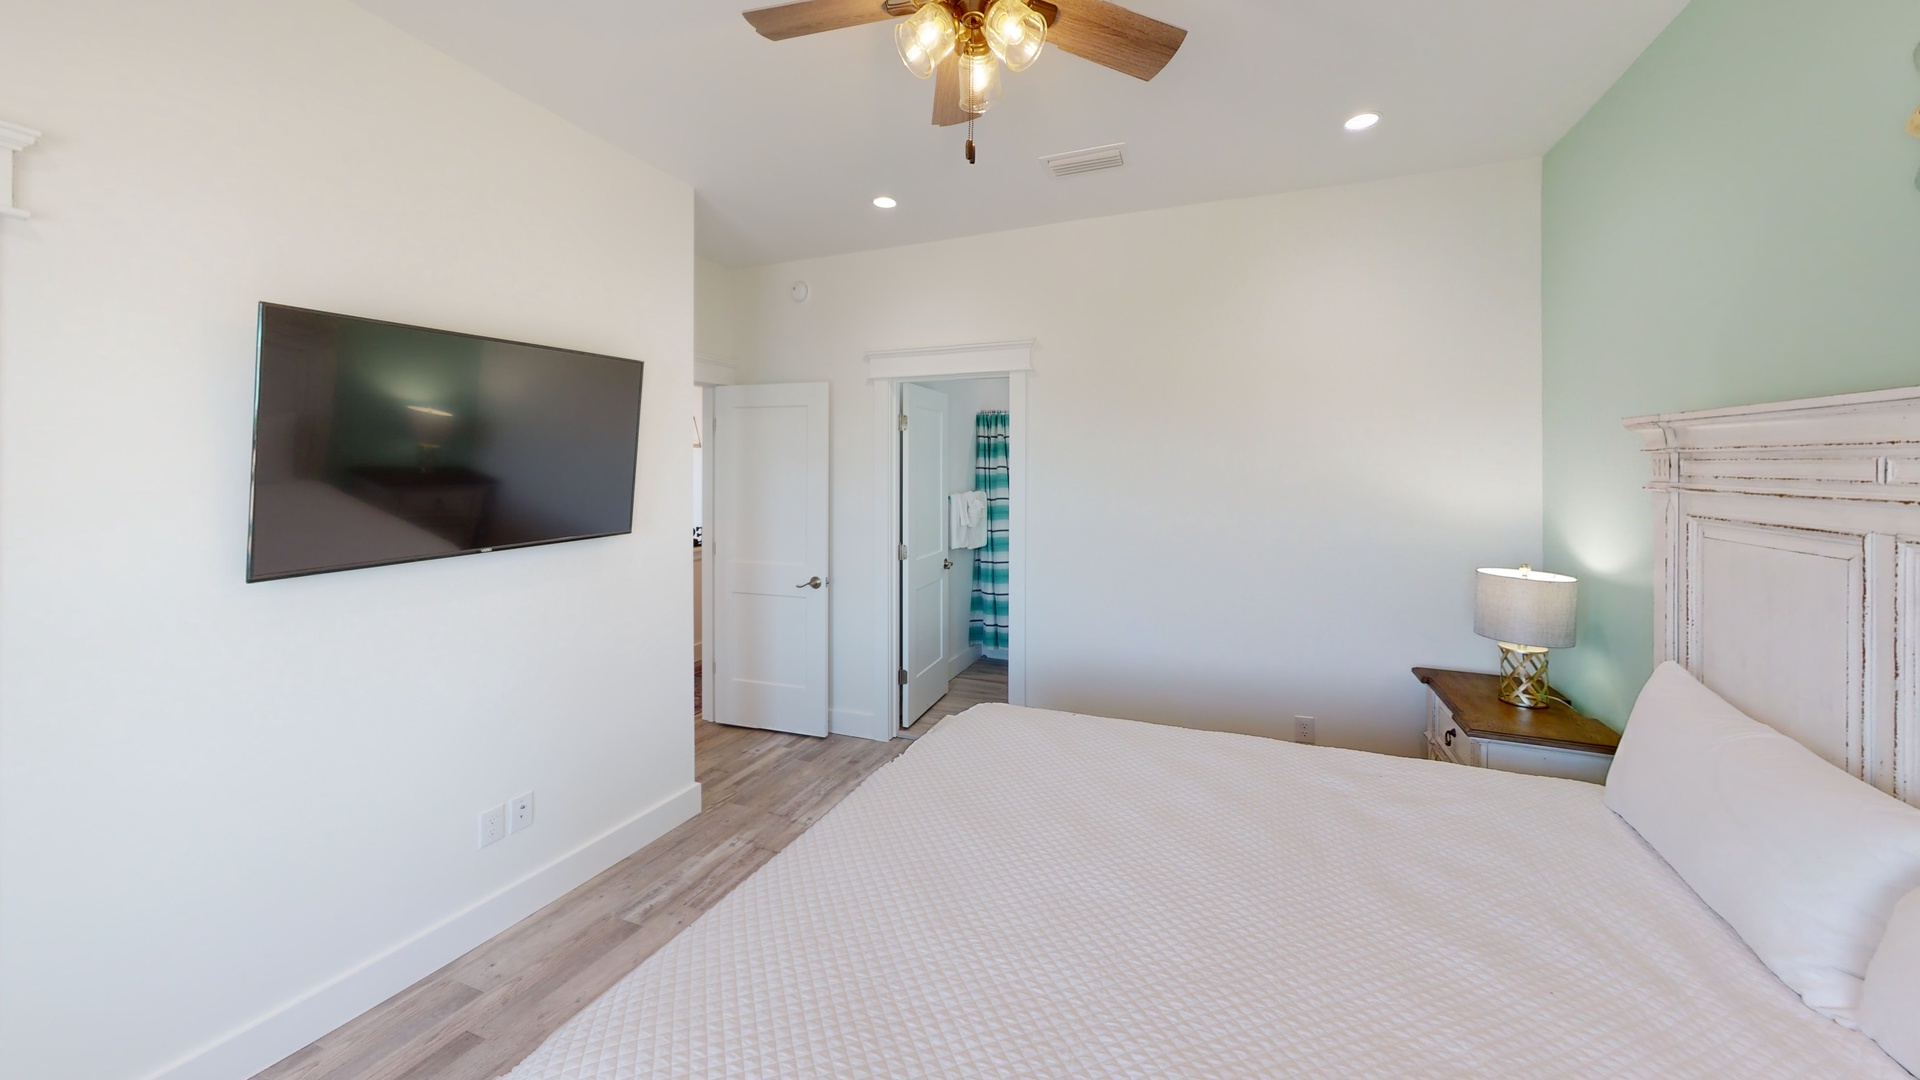 Bedroom 5 has a television, ceiling fan and a door to 2nd floor pool side balcony